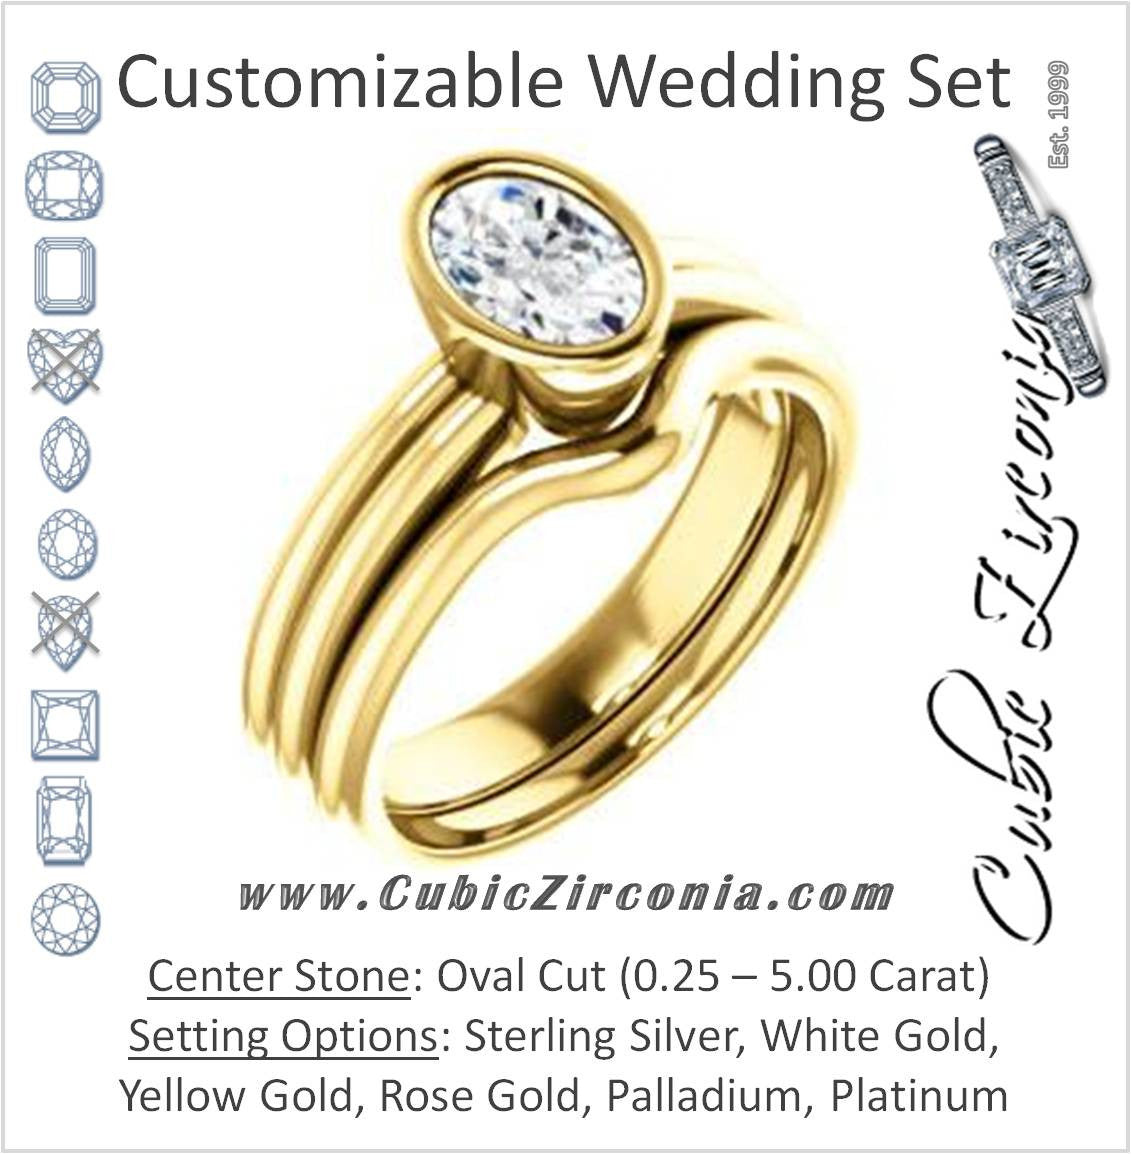 CZ Wedding Set, featuring The Stacie engagement ring (Customizable Bezel-set Oval Cut Solitaire with Grooved Band)